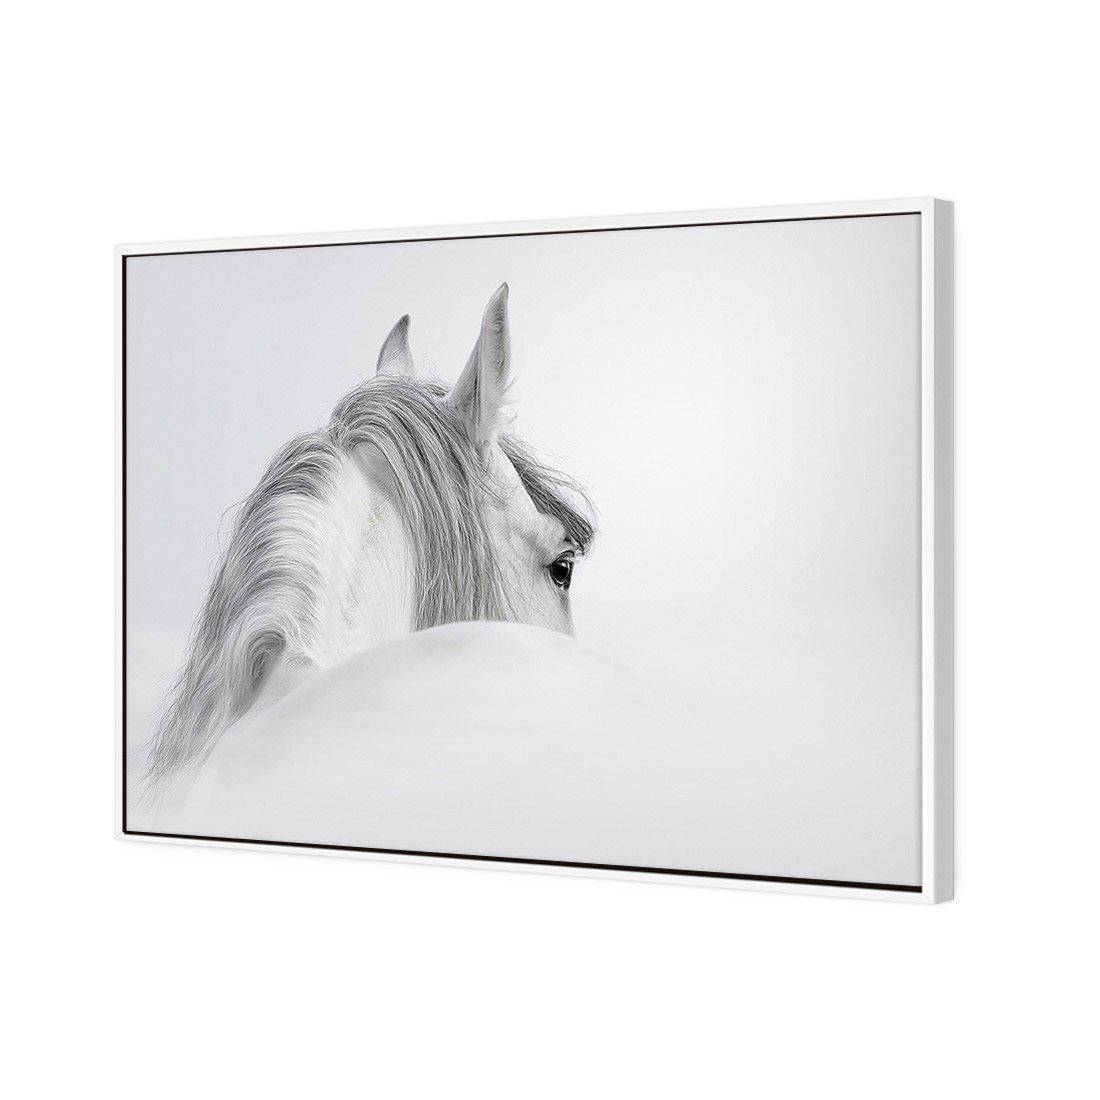 Andalusian Horse In The Mist Canvas Wall Art Designs-45x30cm